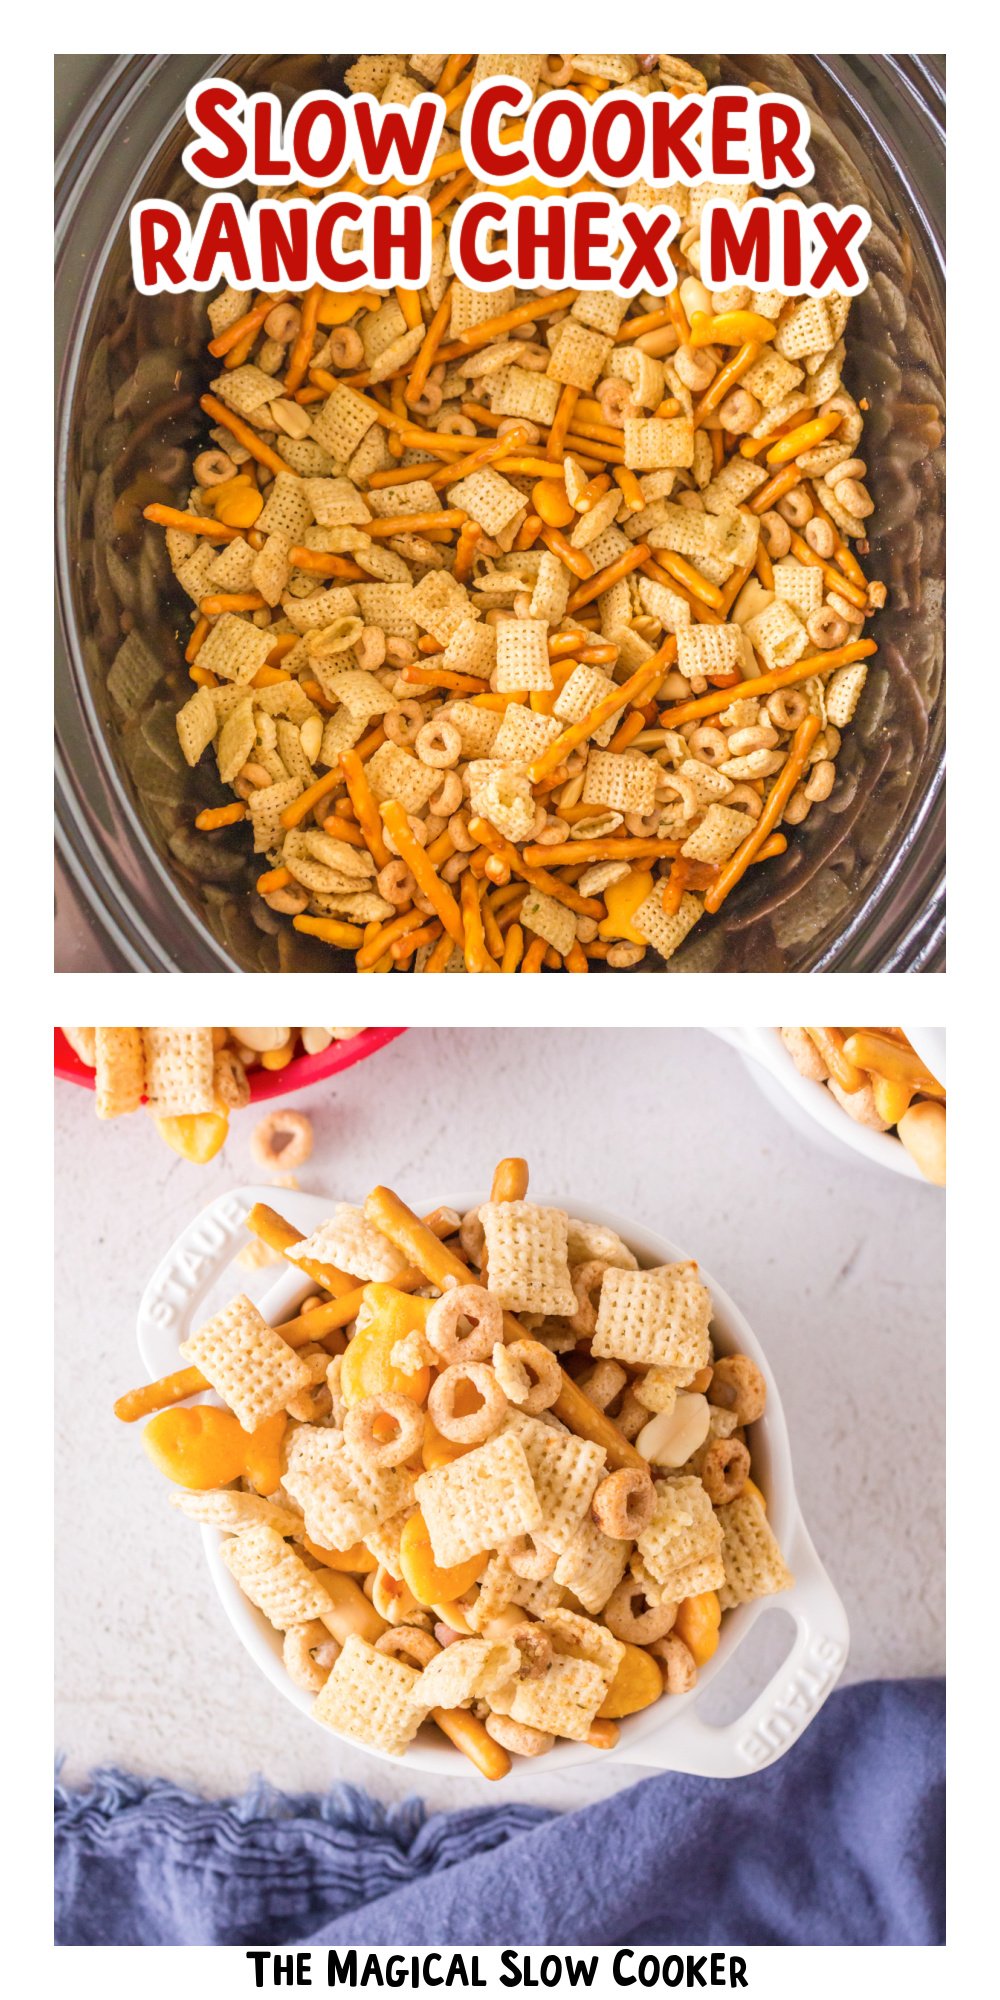 two images of slow cooker ranch chex mix with text title overlay.